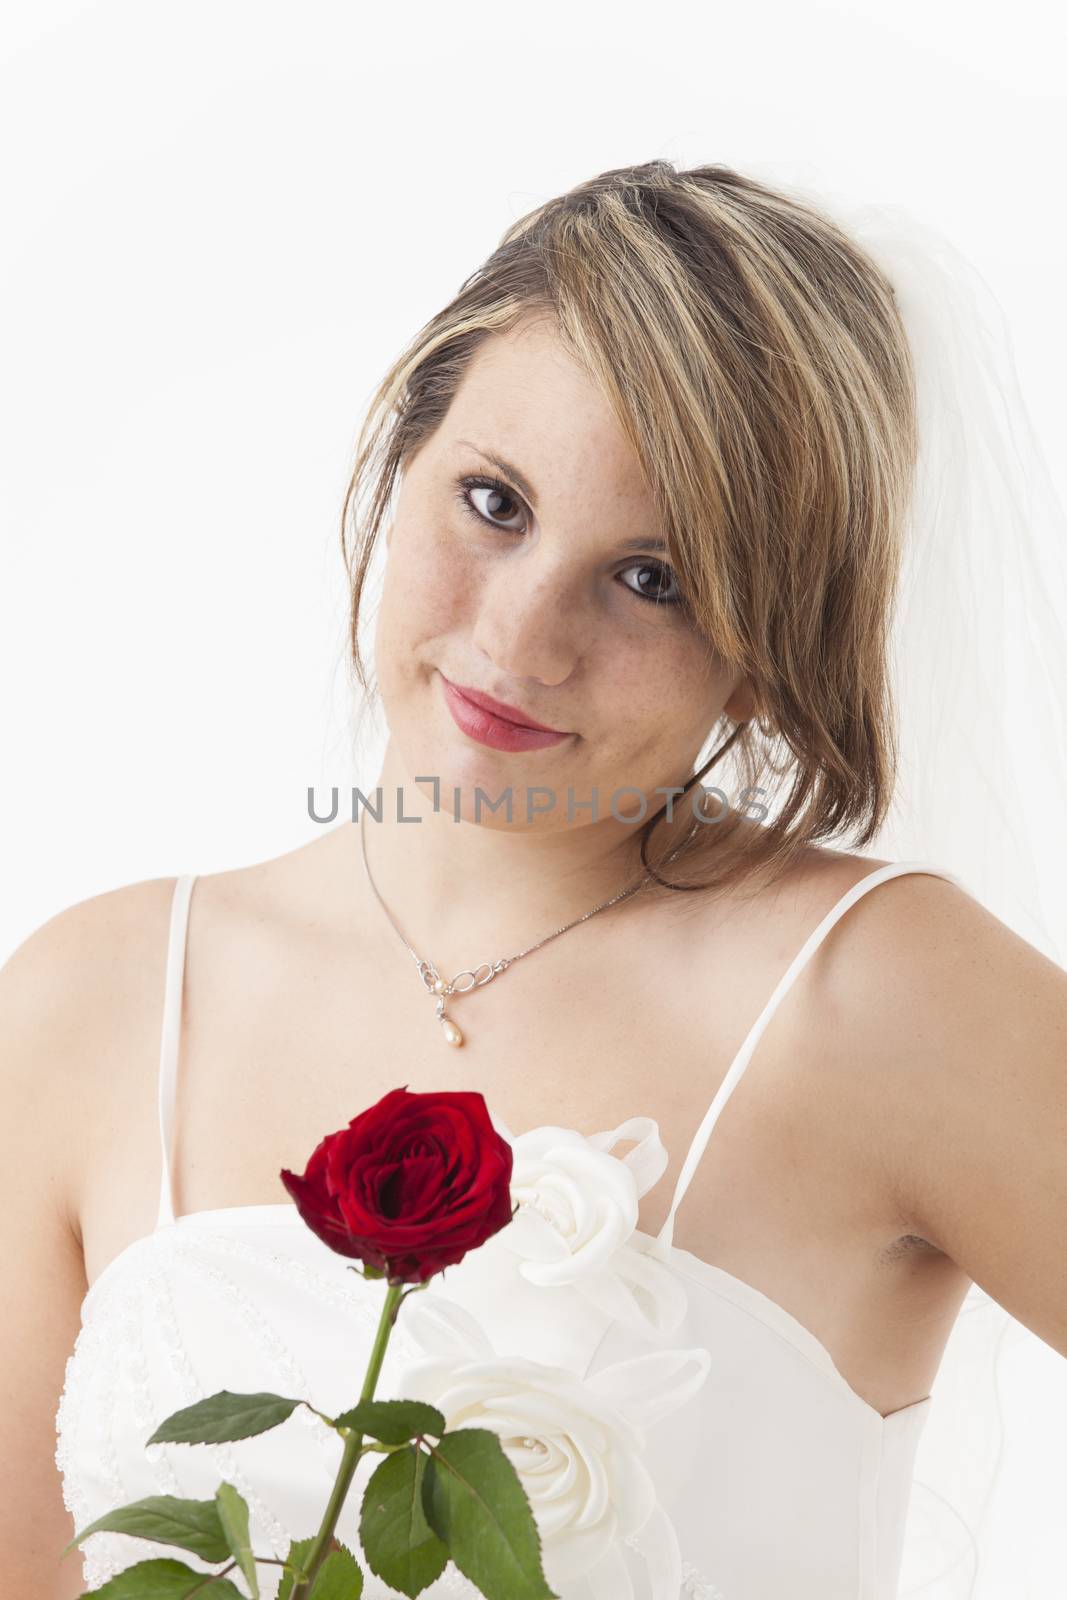 young bride with a red rose by bernjuer